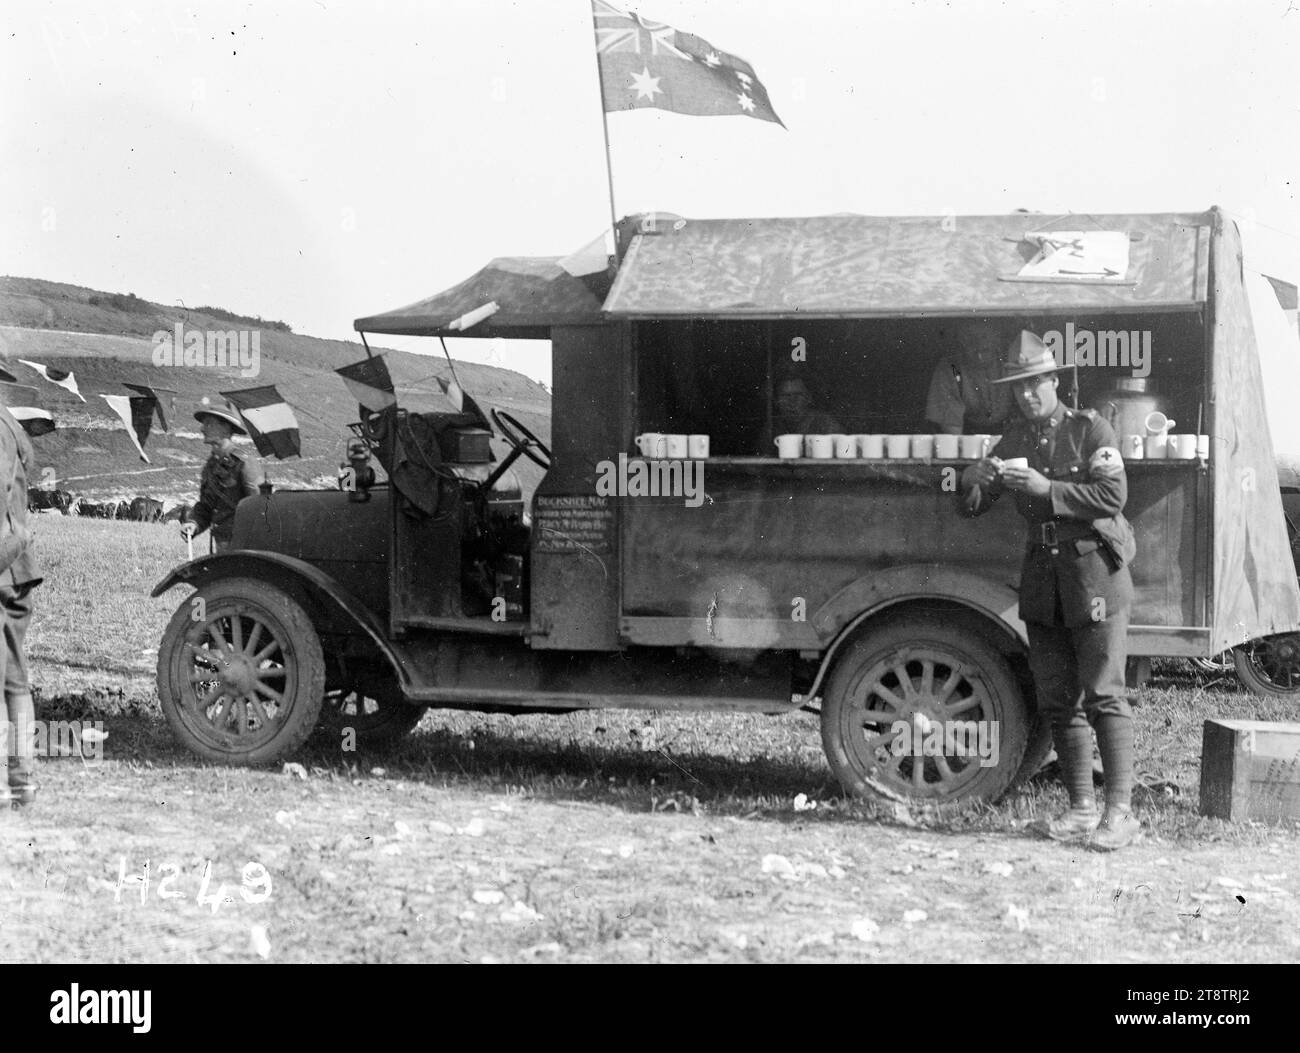 A mobile canteen at the Anzac Horse Show, World War I, A lorry nicknamed a 'Buckshee 'Mac' provides a canteen service to soldiers at the Anzac Horse Show during World War I. A row of mugs is visible on a shelf along one side of the vehicle. An Australian flag flies from its roof. Photograph taken France 16 September 1917 Stock Photo